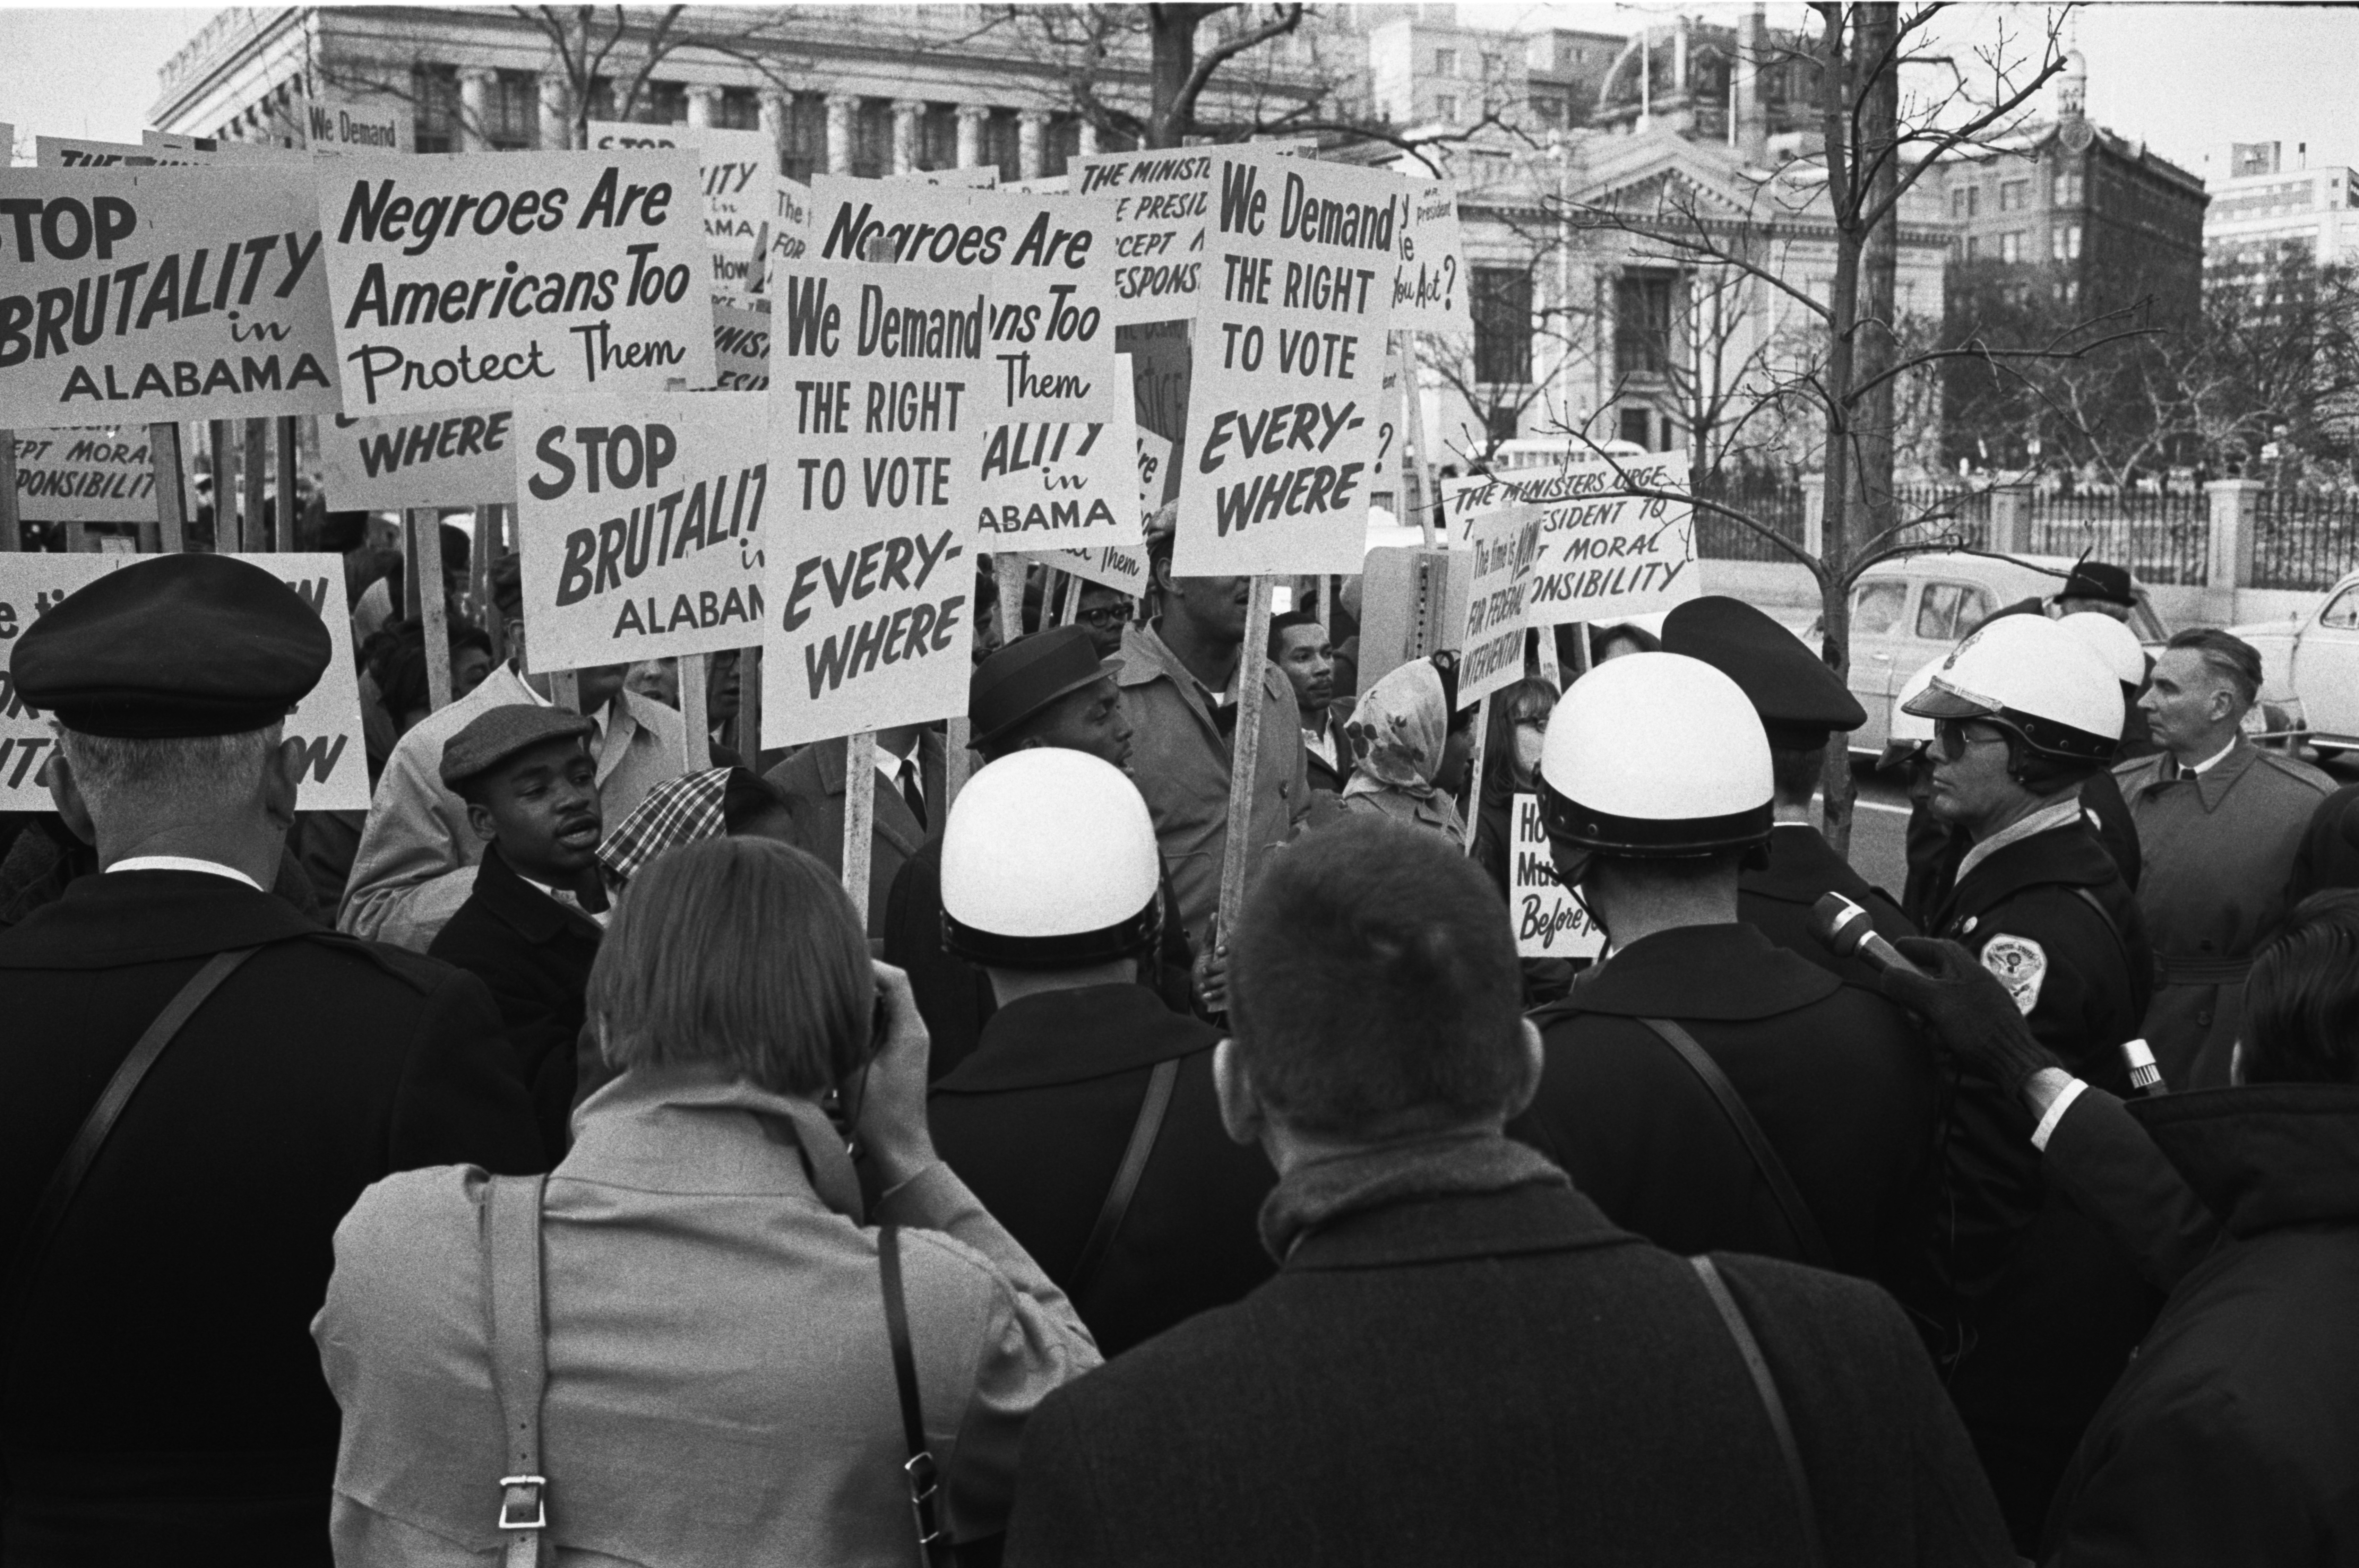 In 1965, Black protesters gathered outside of the White House to demand the expansion and protection of their voting rights after “Bloody Sunday.”